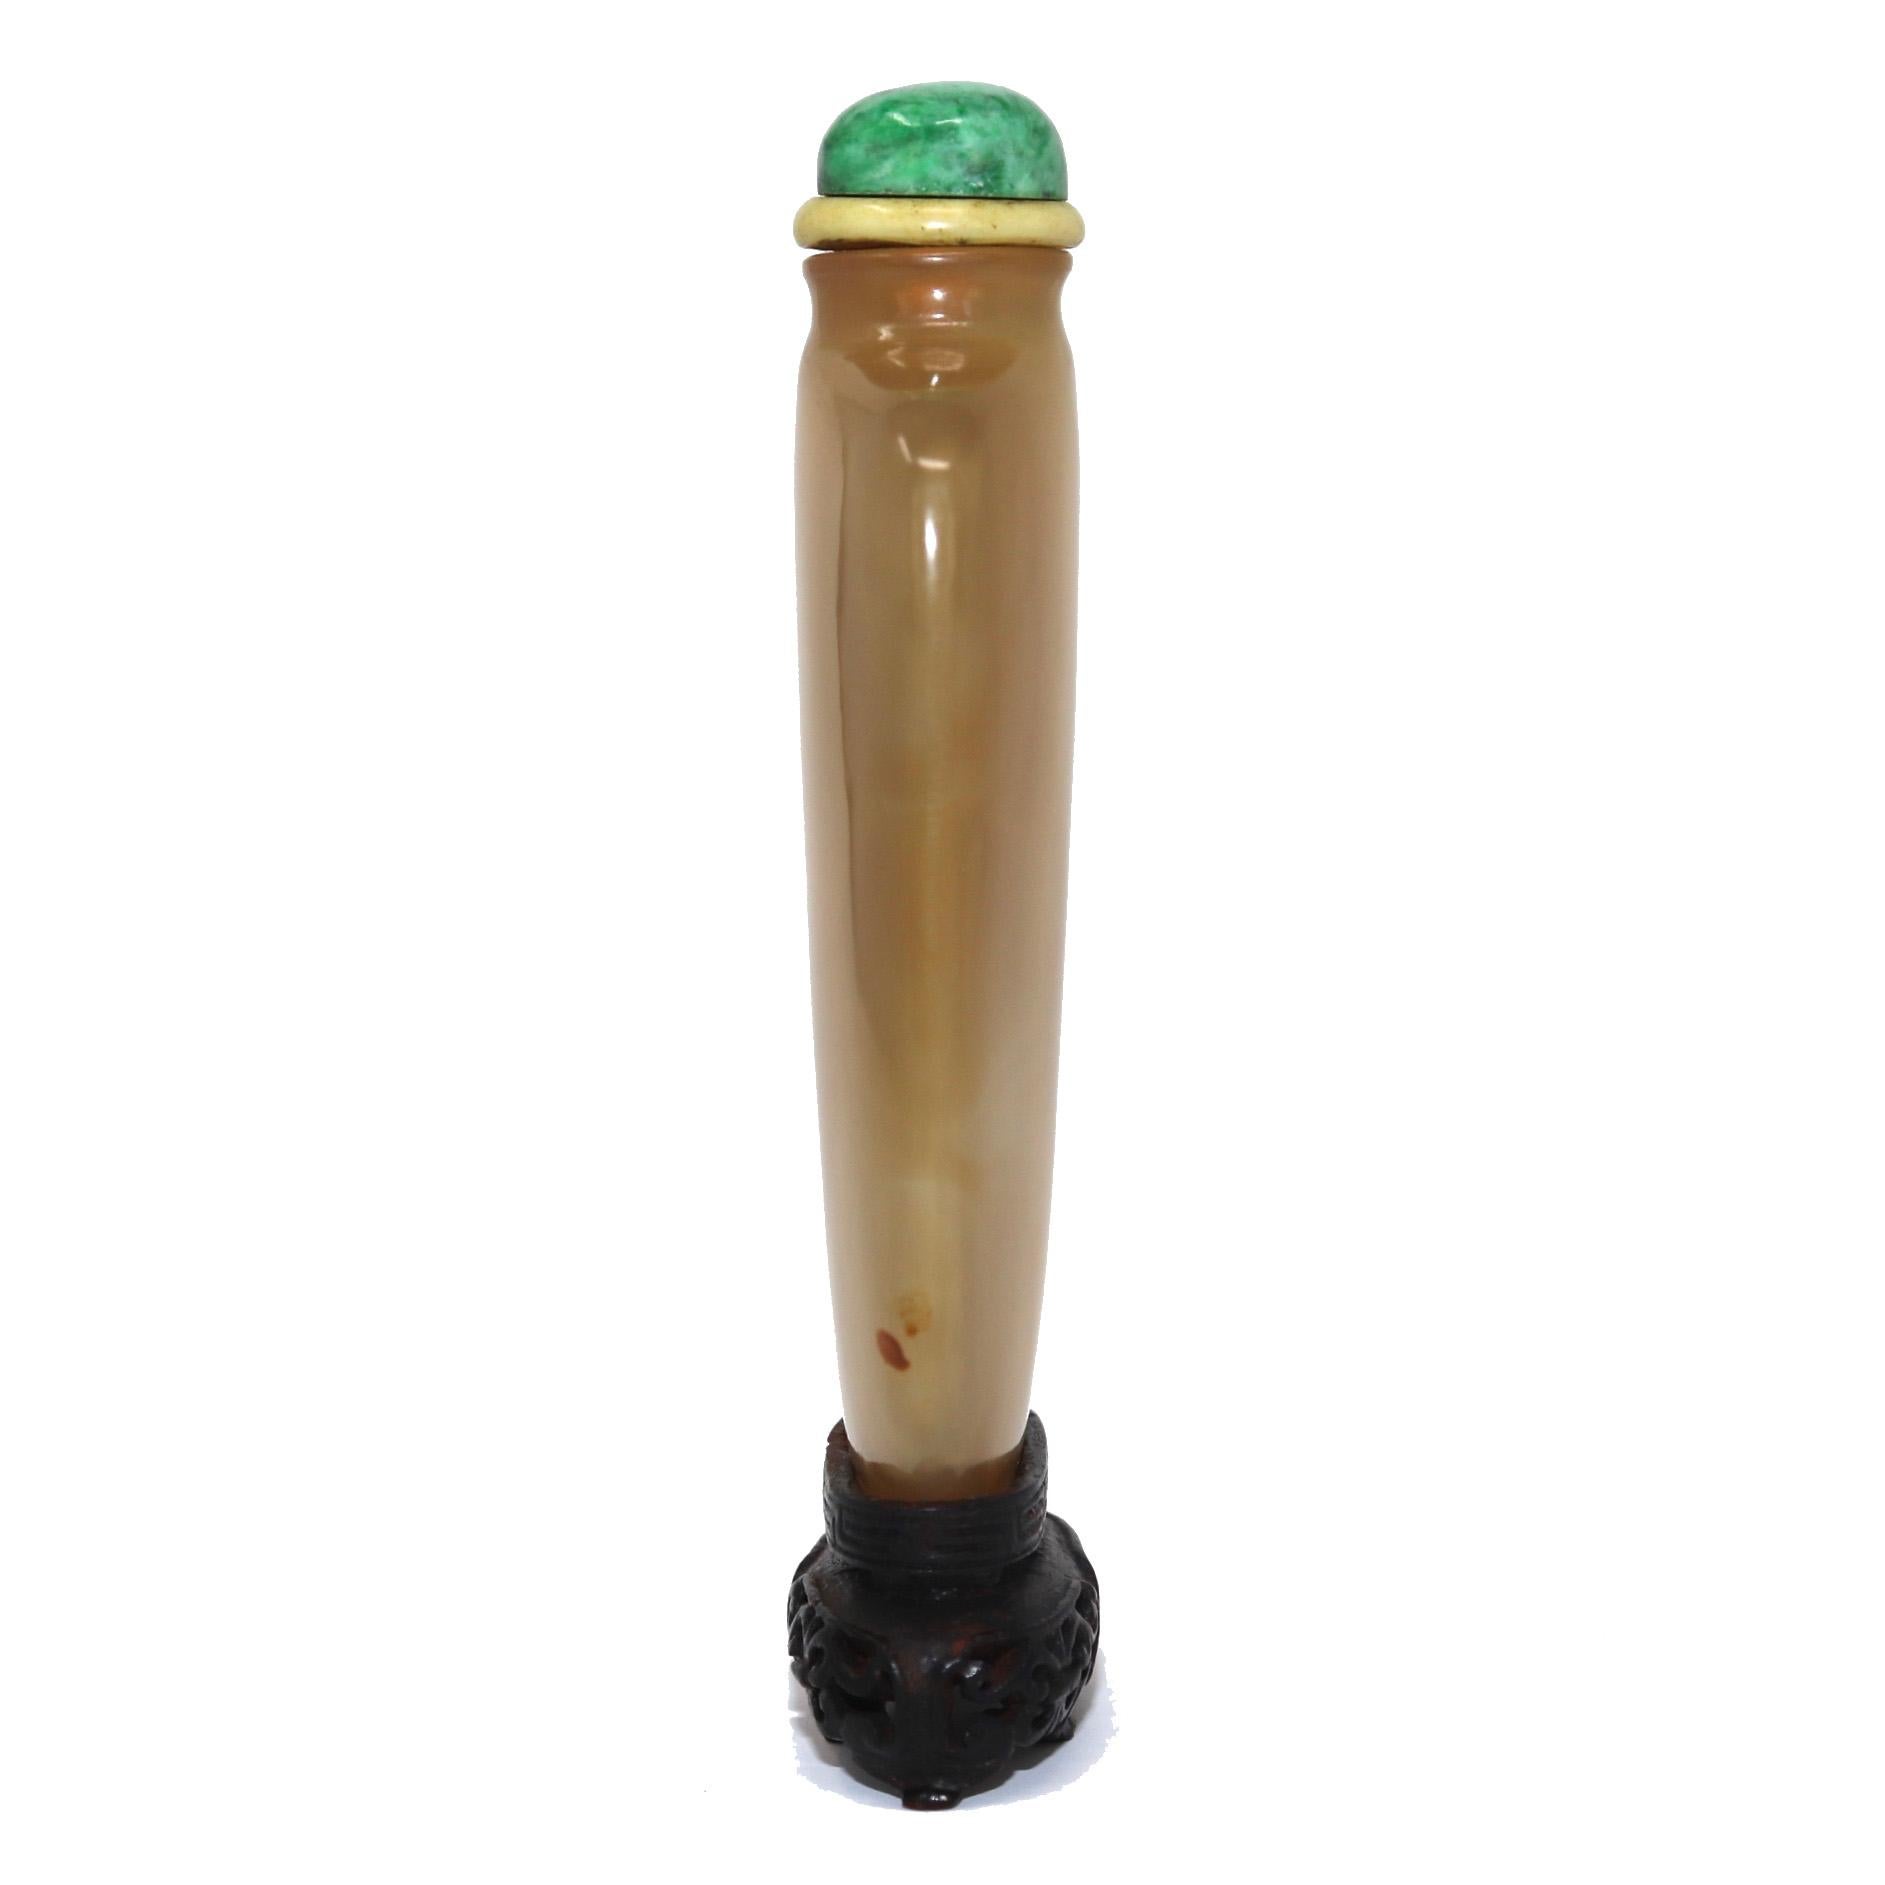 Antique Chinese Agate sleeve snuff bottle, of a tapered and flattened shield form with a slightly flared lip on the short neck, flat mouth rim, narrow aperture, very well hollowed, concave foot, the quartz of a pleasing warm honey tone, green